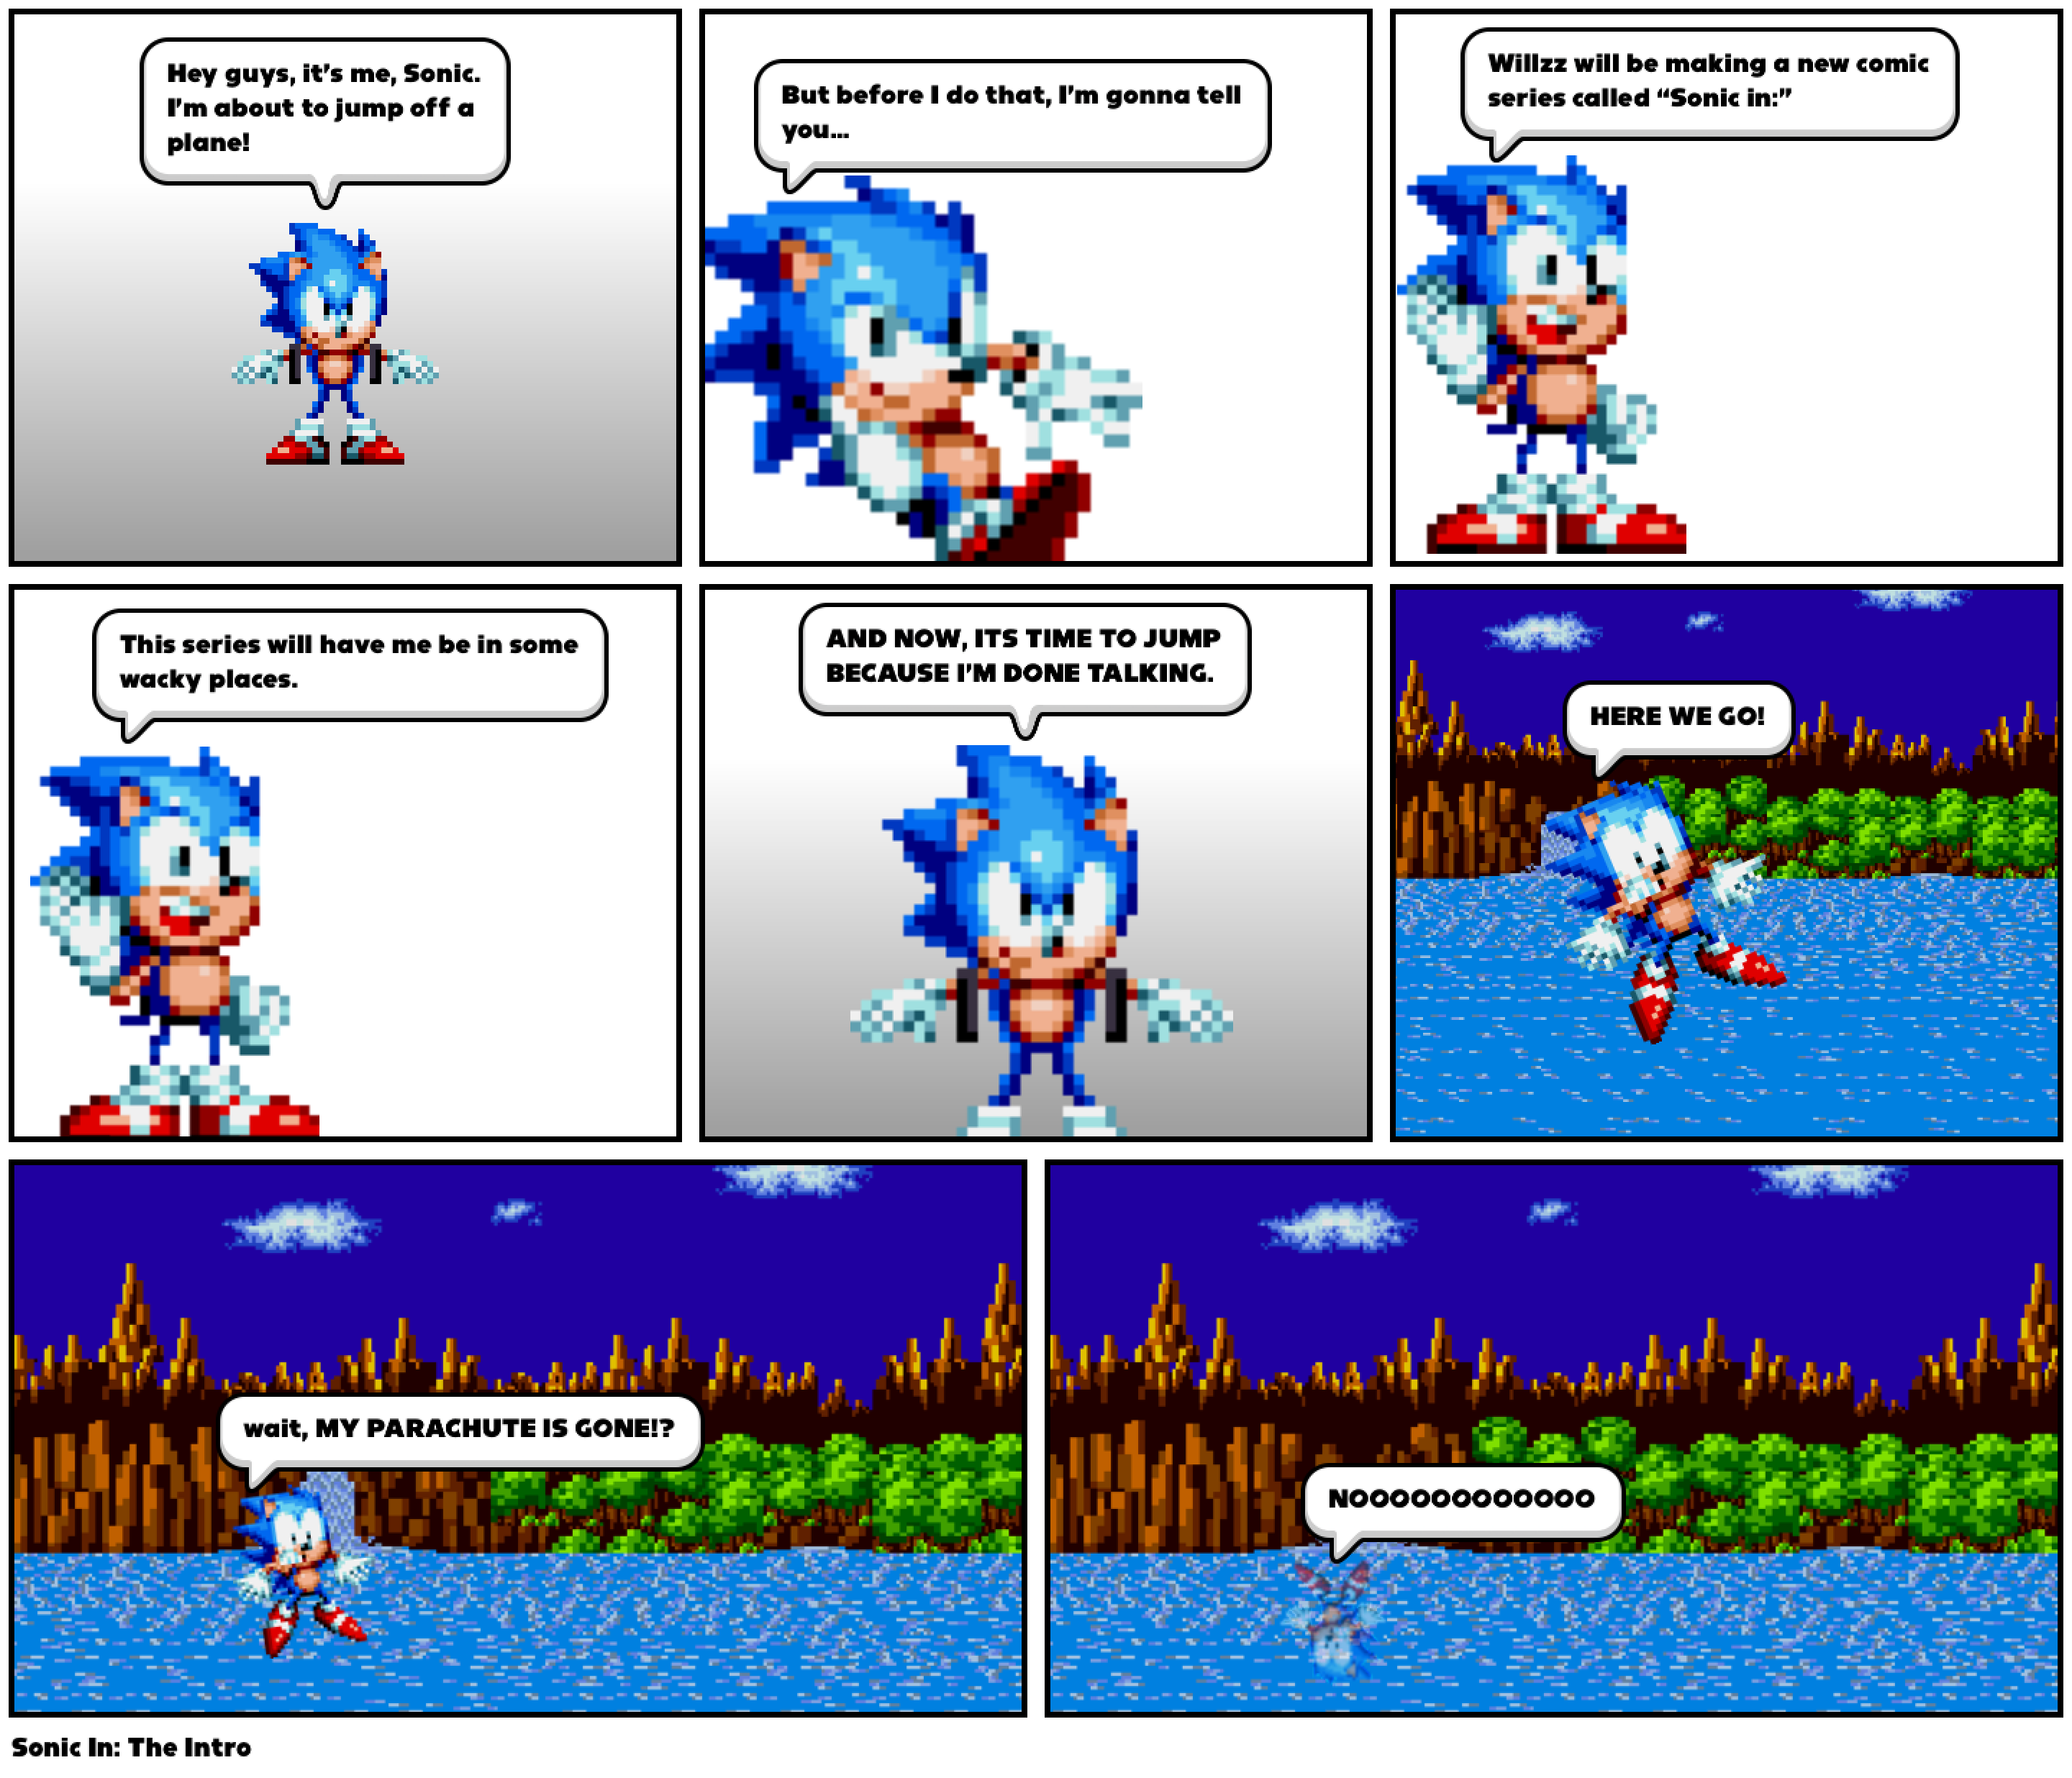 Sonic In: The Intro